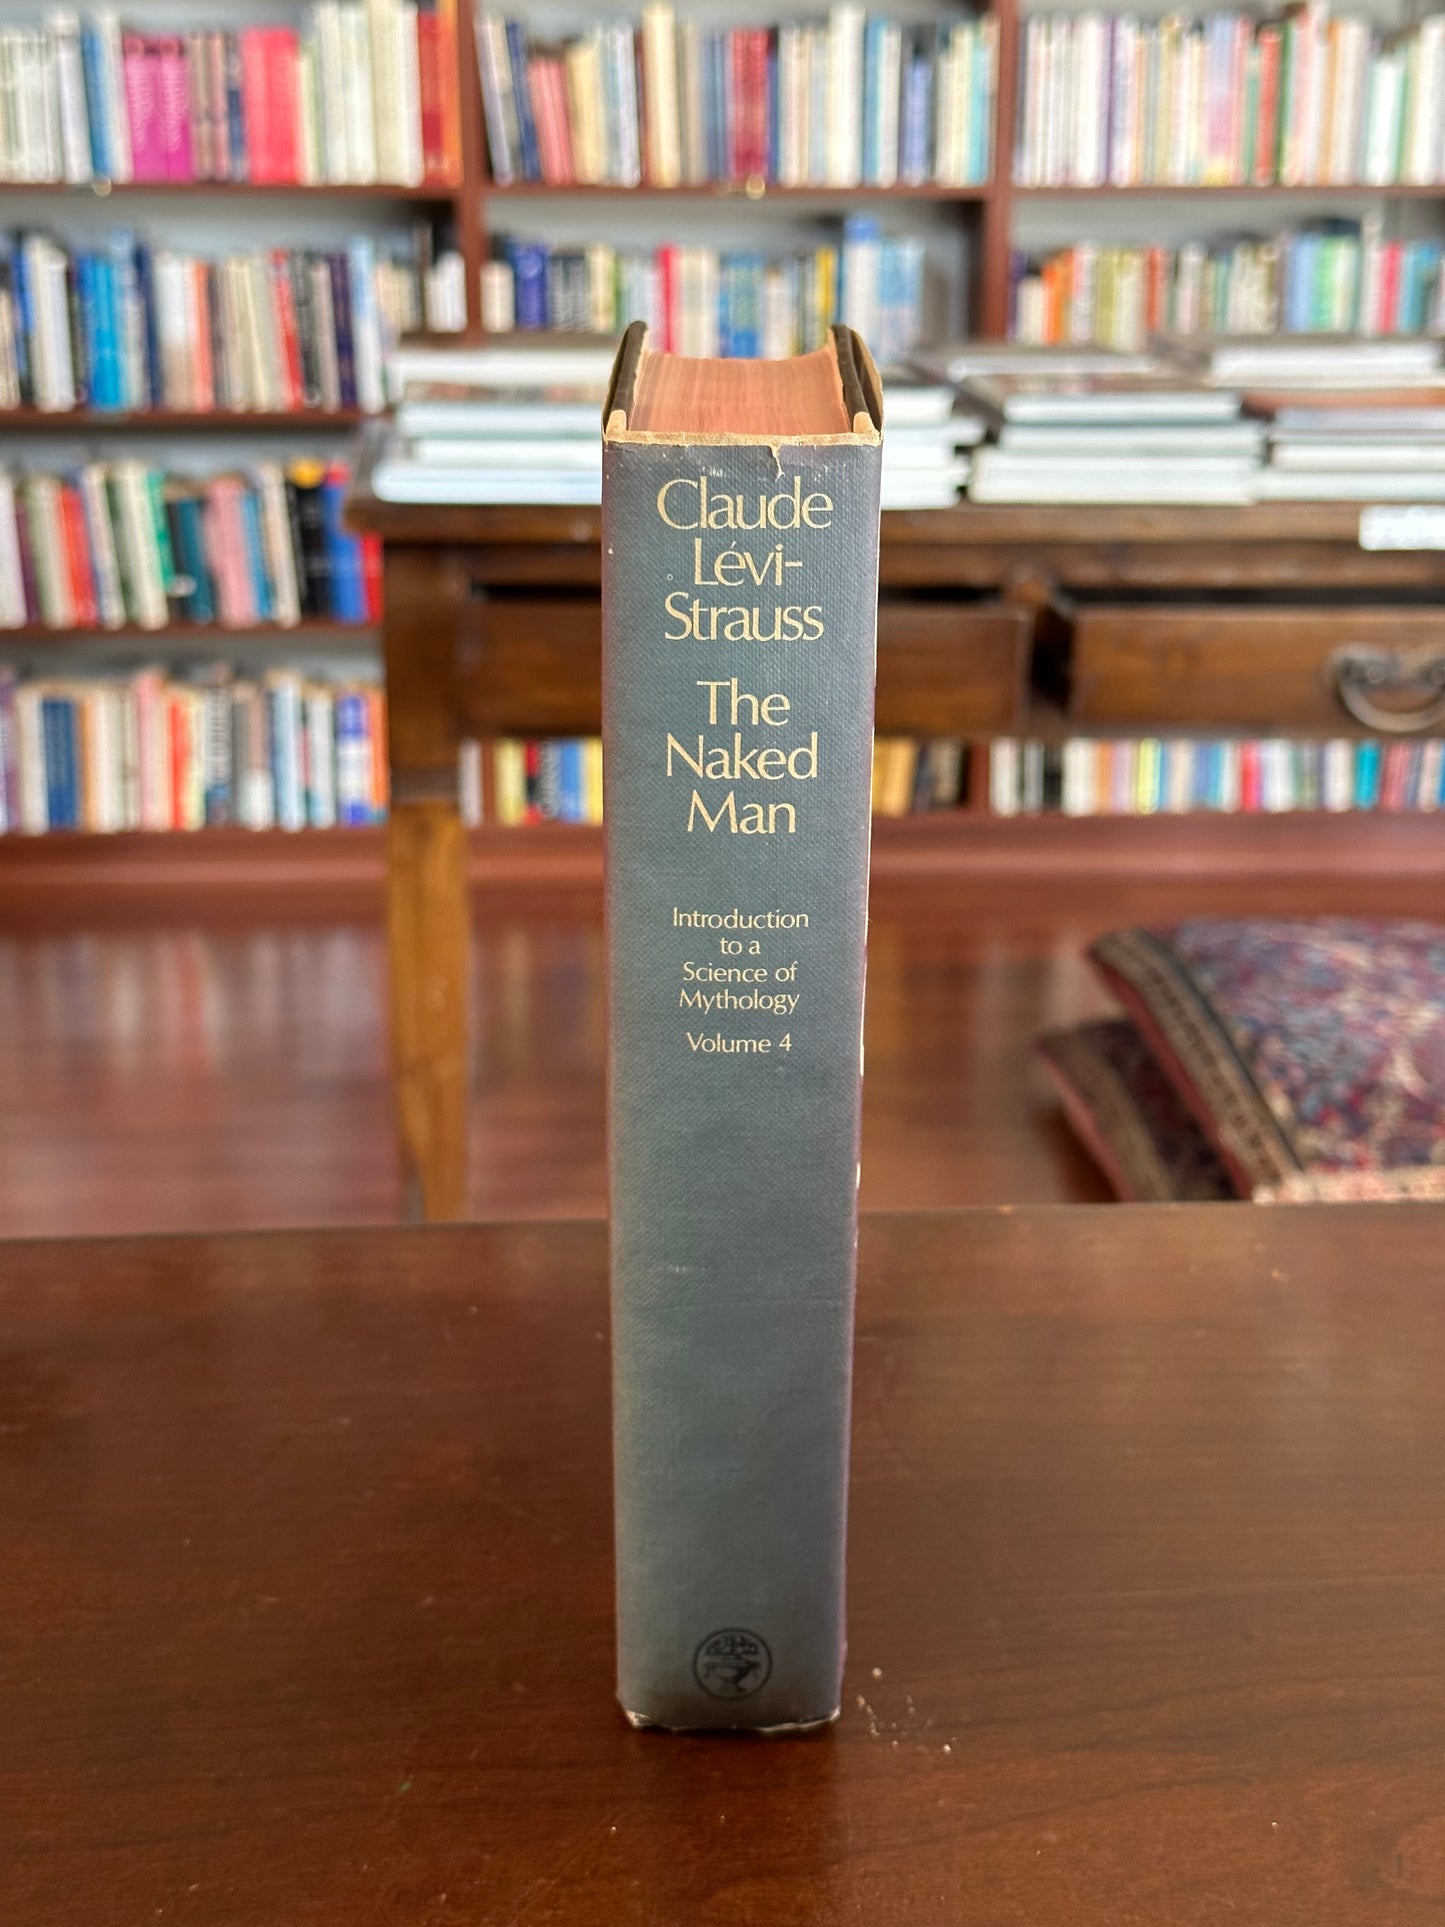 The Naked Man by Claude Levi-Strauss (First Edition)